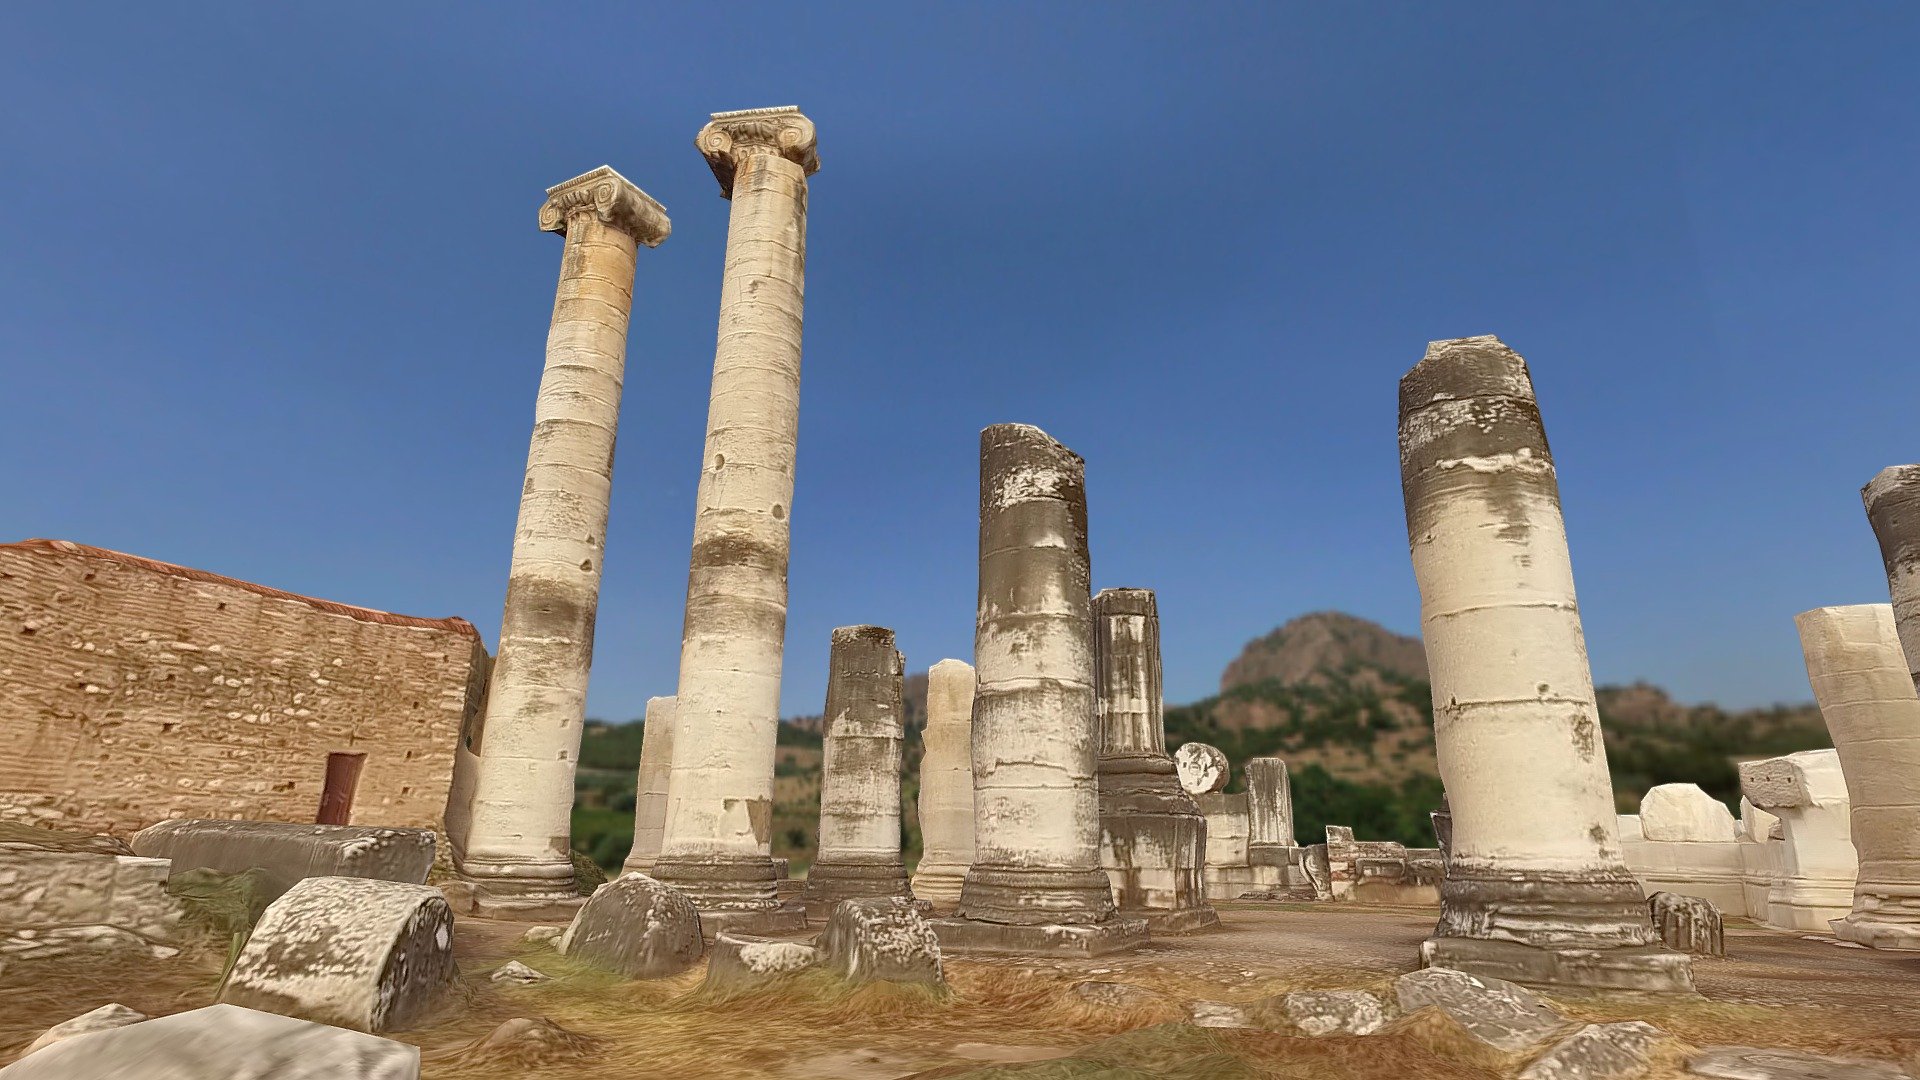 Videogrammetry reconstruction from youtube video.

The Temple of Artemis at Sardis, the fourth largest Ionic temple in the world, is situated dramatically on the western slopes of the Acropolis, below the mass of the Tmolus Mountains in a broad valley opening into the ancient Pactolus River bed. As with the other two Artemisions of Asia Minor, the great Archaic/Hellenistic temple at Ephesus and Hermogenes’ Temple of Artemis Leucophryene at Magnesia-on-the-Meander, the principal facade of the temple was toward the west. 

The area might have been sacred to Artemis from the earliest days onward as attested by a large Archaic altar of limestone blocks, located at the west end of the temple. 
Although the exact date of this altar (which was enlarged at a later period) is not certain, it is clear that the earlier structure predated the temple 3d model